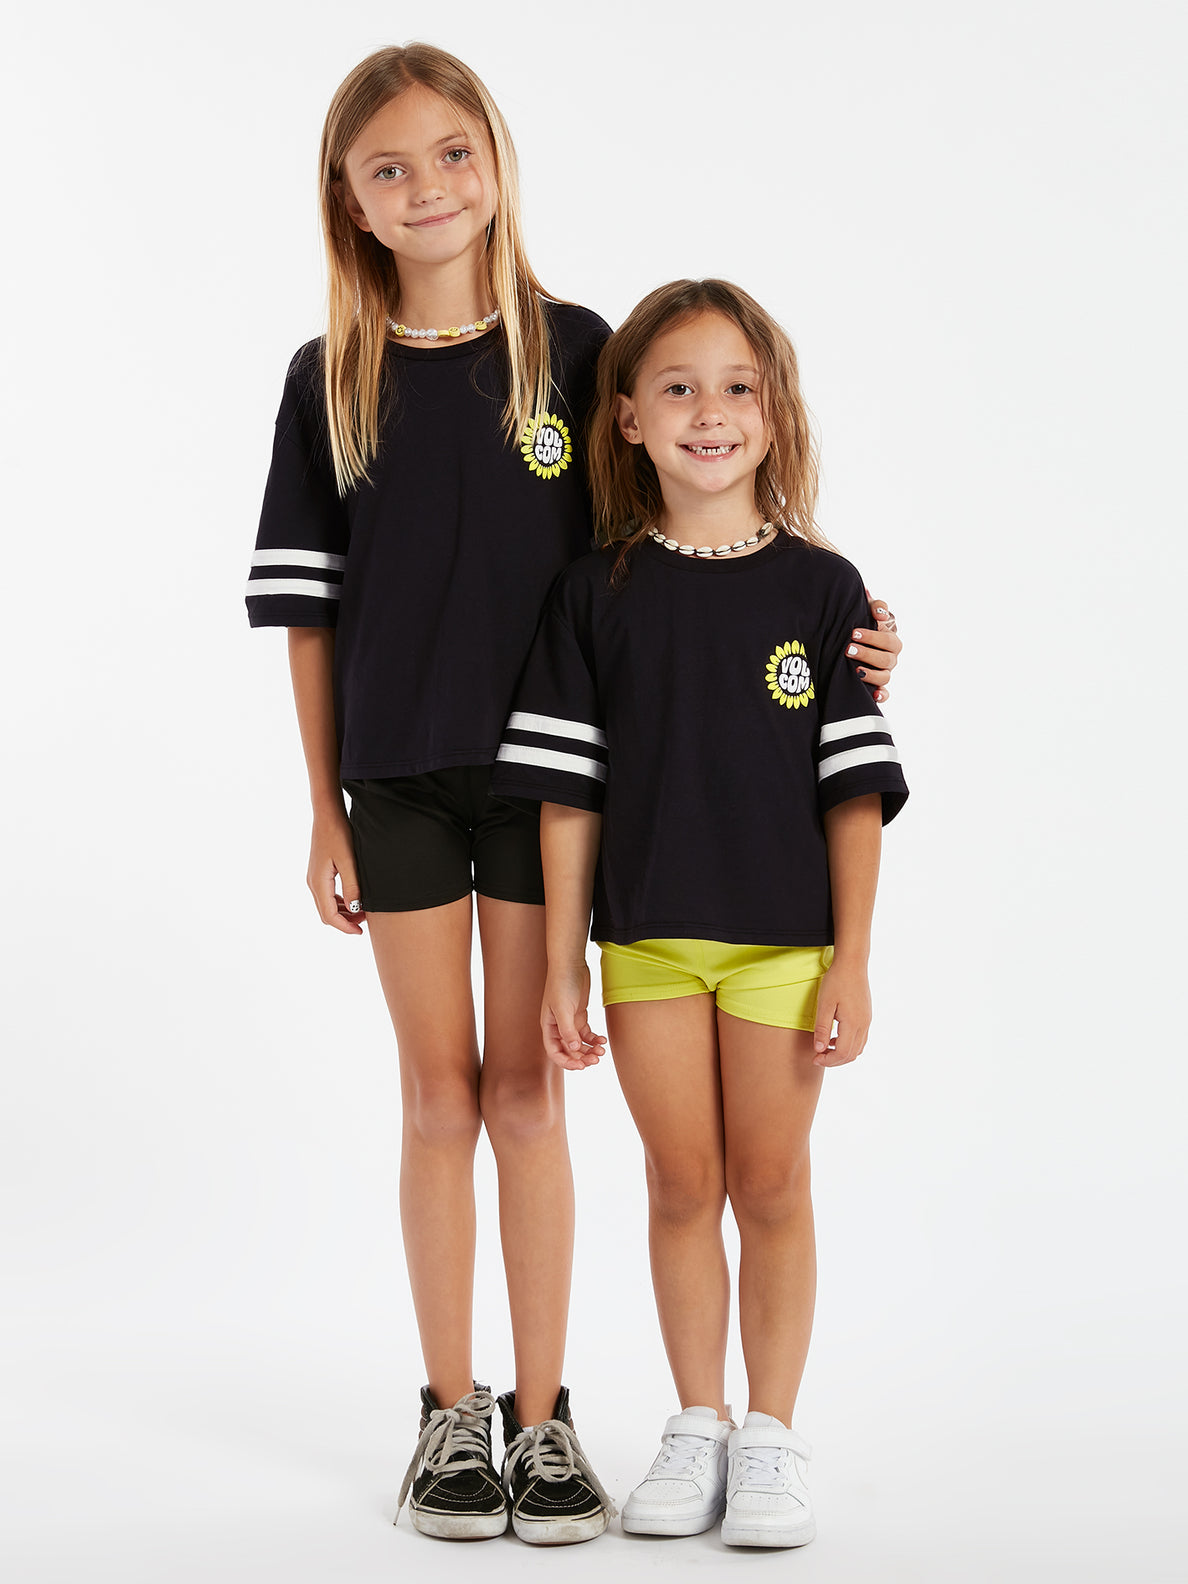 Big Girls Truly Stoked Tee - Black (R3522201_BLK) [3]